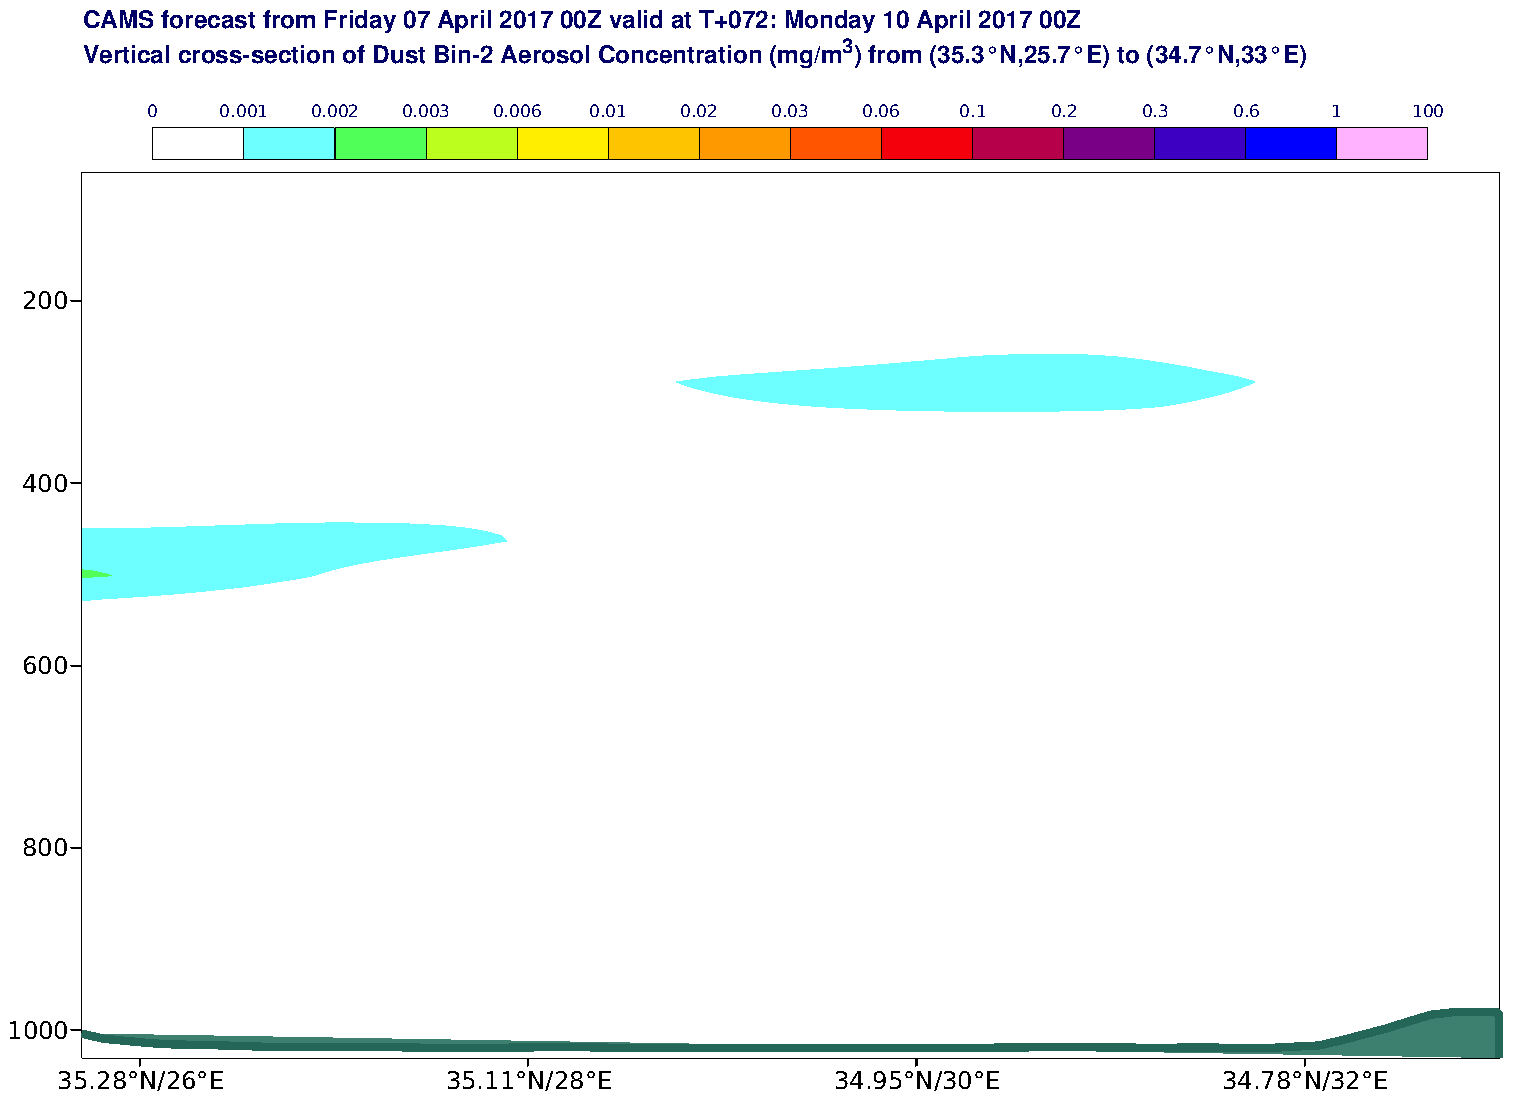 Vertical cross-section of Dust Bin-2 Aerosol Concentration (mg/m3) valid at T72 - 2017-04-10 00:00